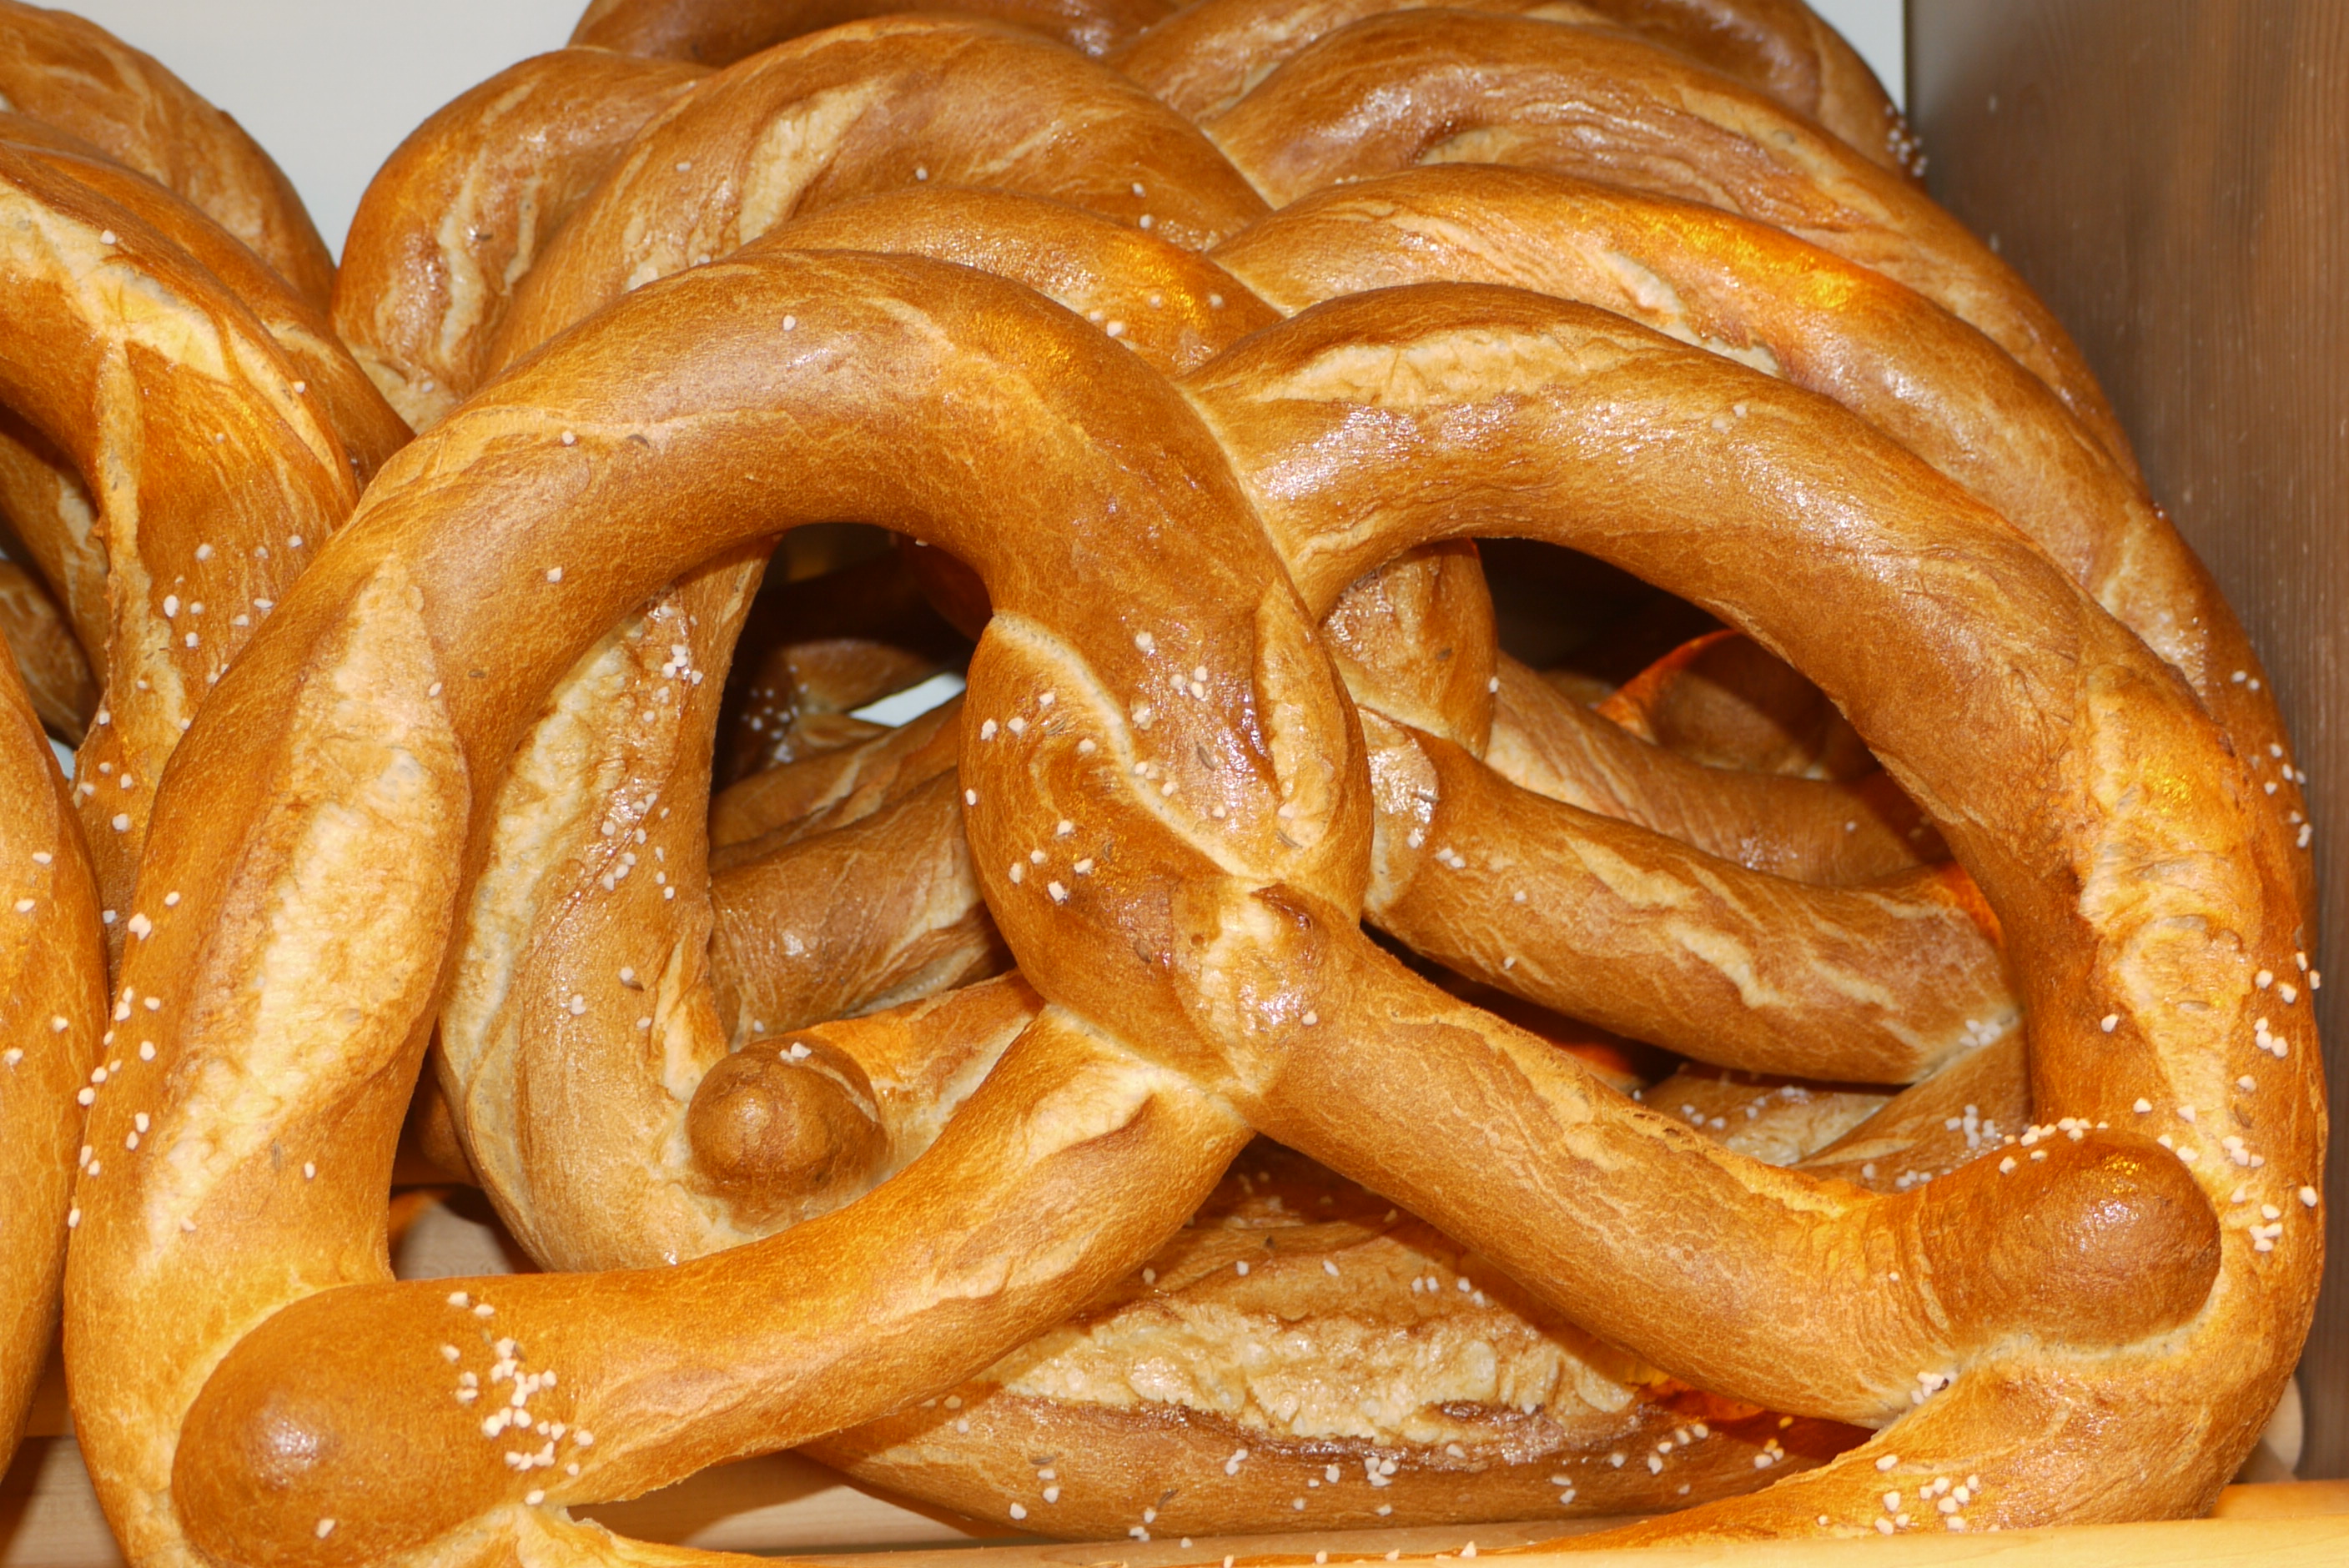 Germany gets my best country for bread and brezel (pretzel) vote.